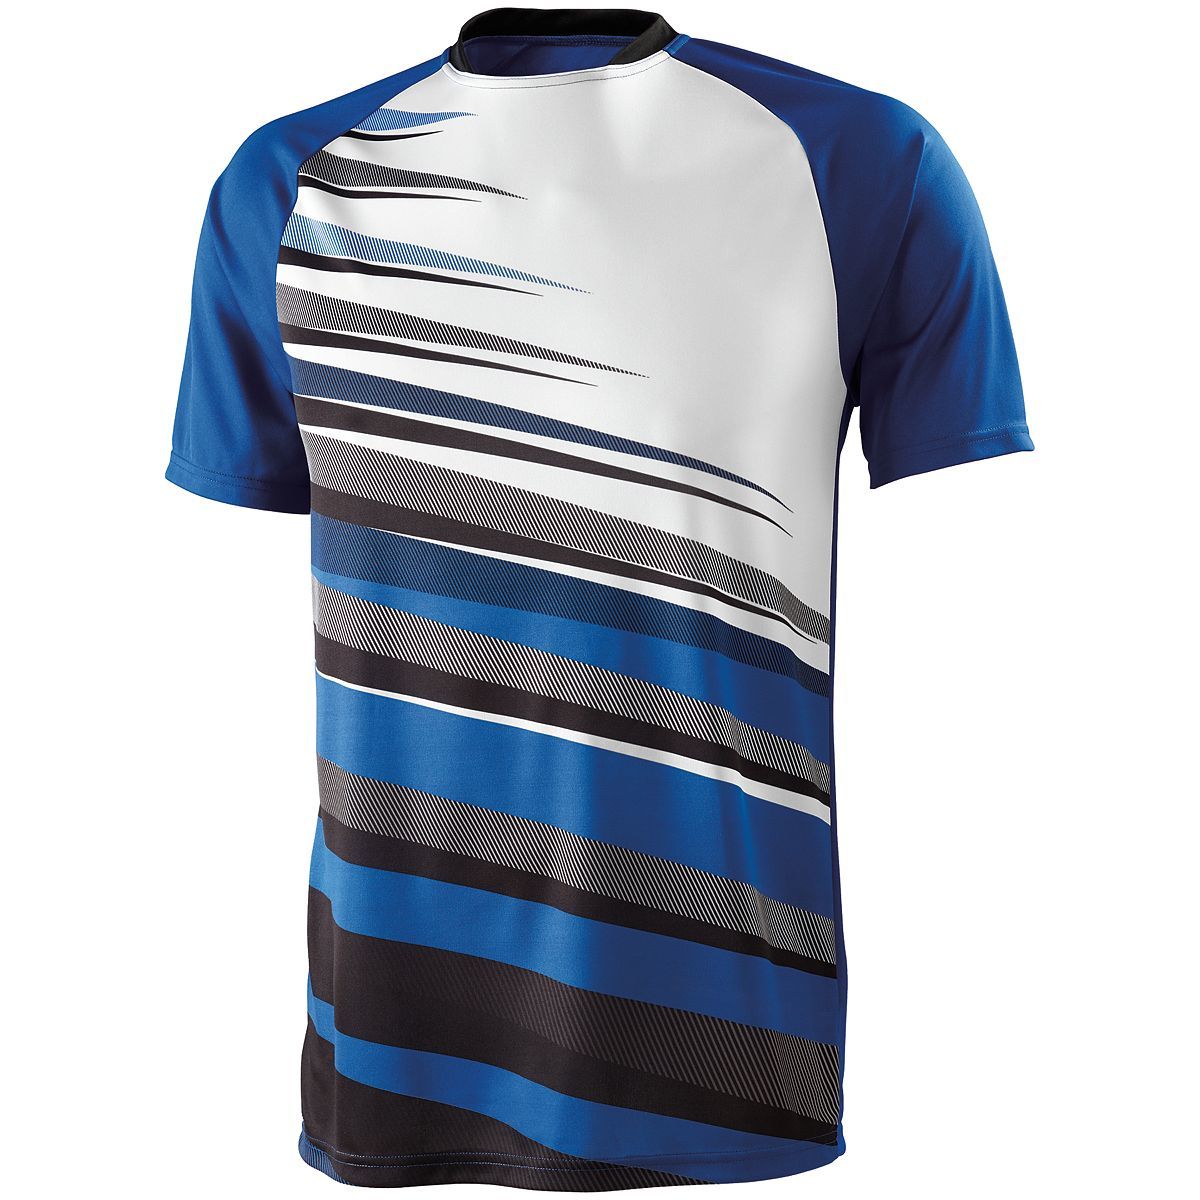 High 5 Youth Galactic Jersey in Royal/Black/White  -Part of the Youth, Youth-Jersey, High5-Products, Soccer, Shirts, All-Sports-1 product lines at KanaleyCreations.com